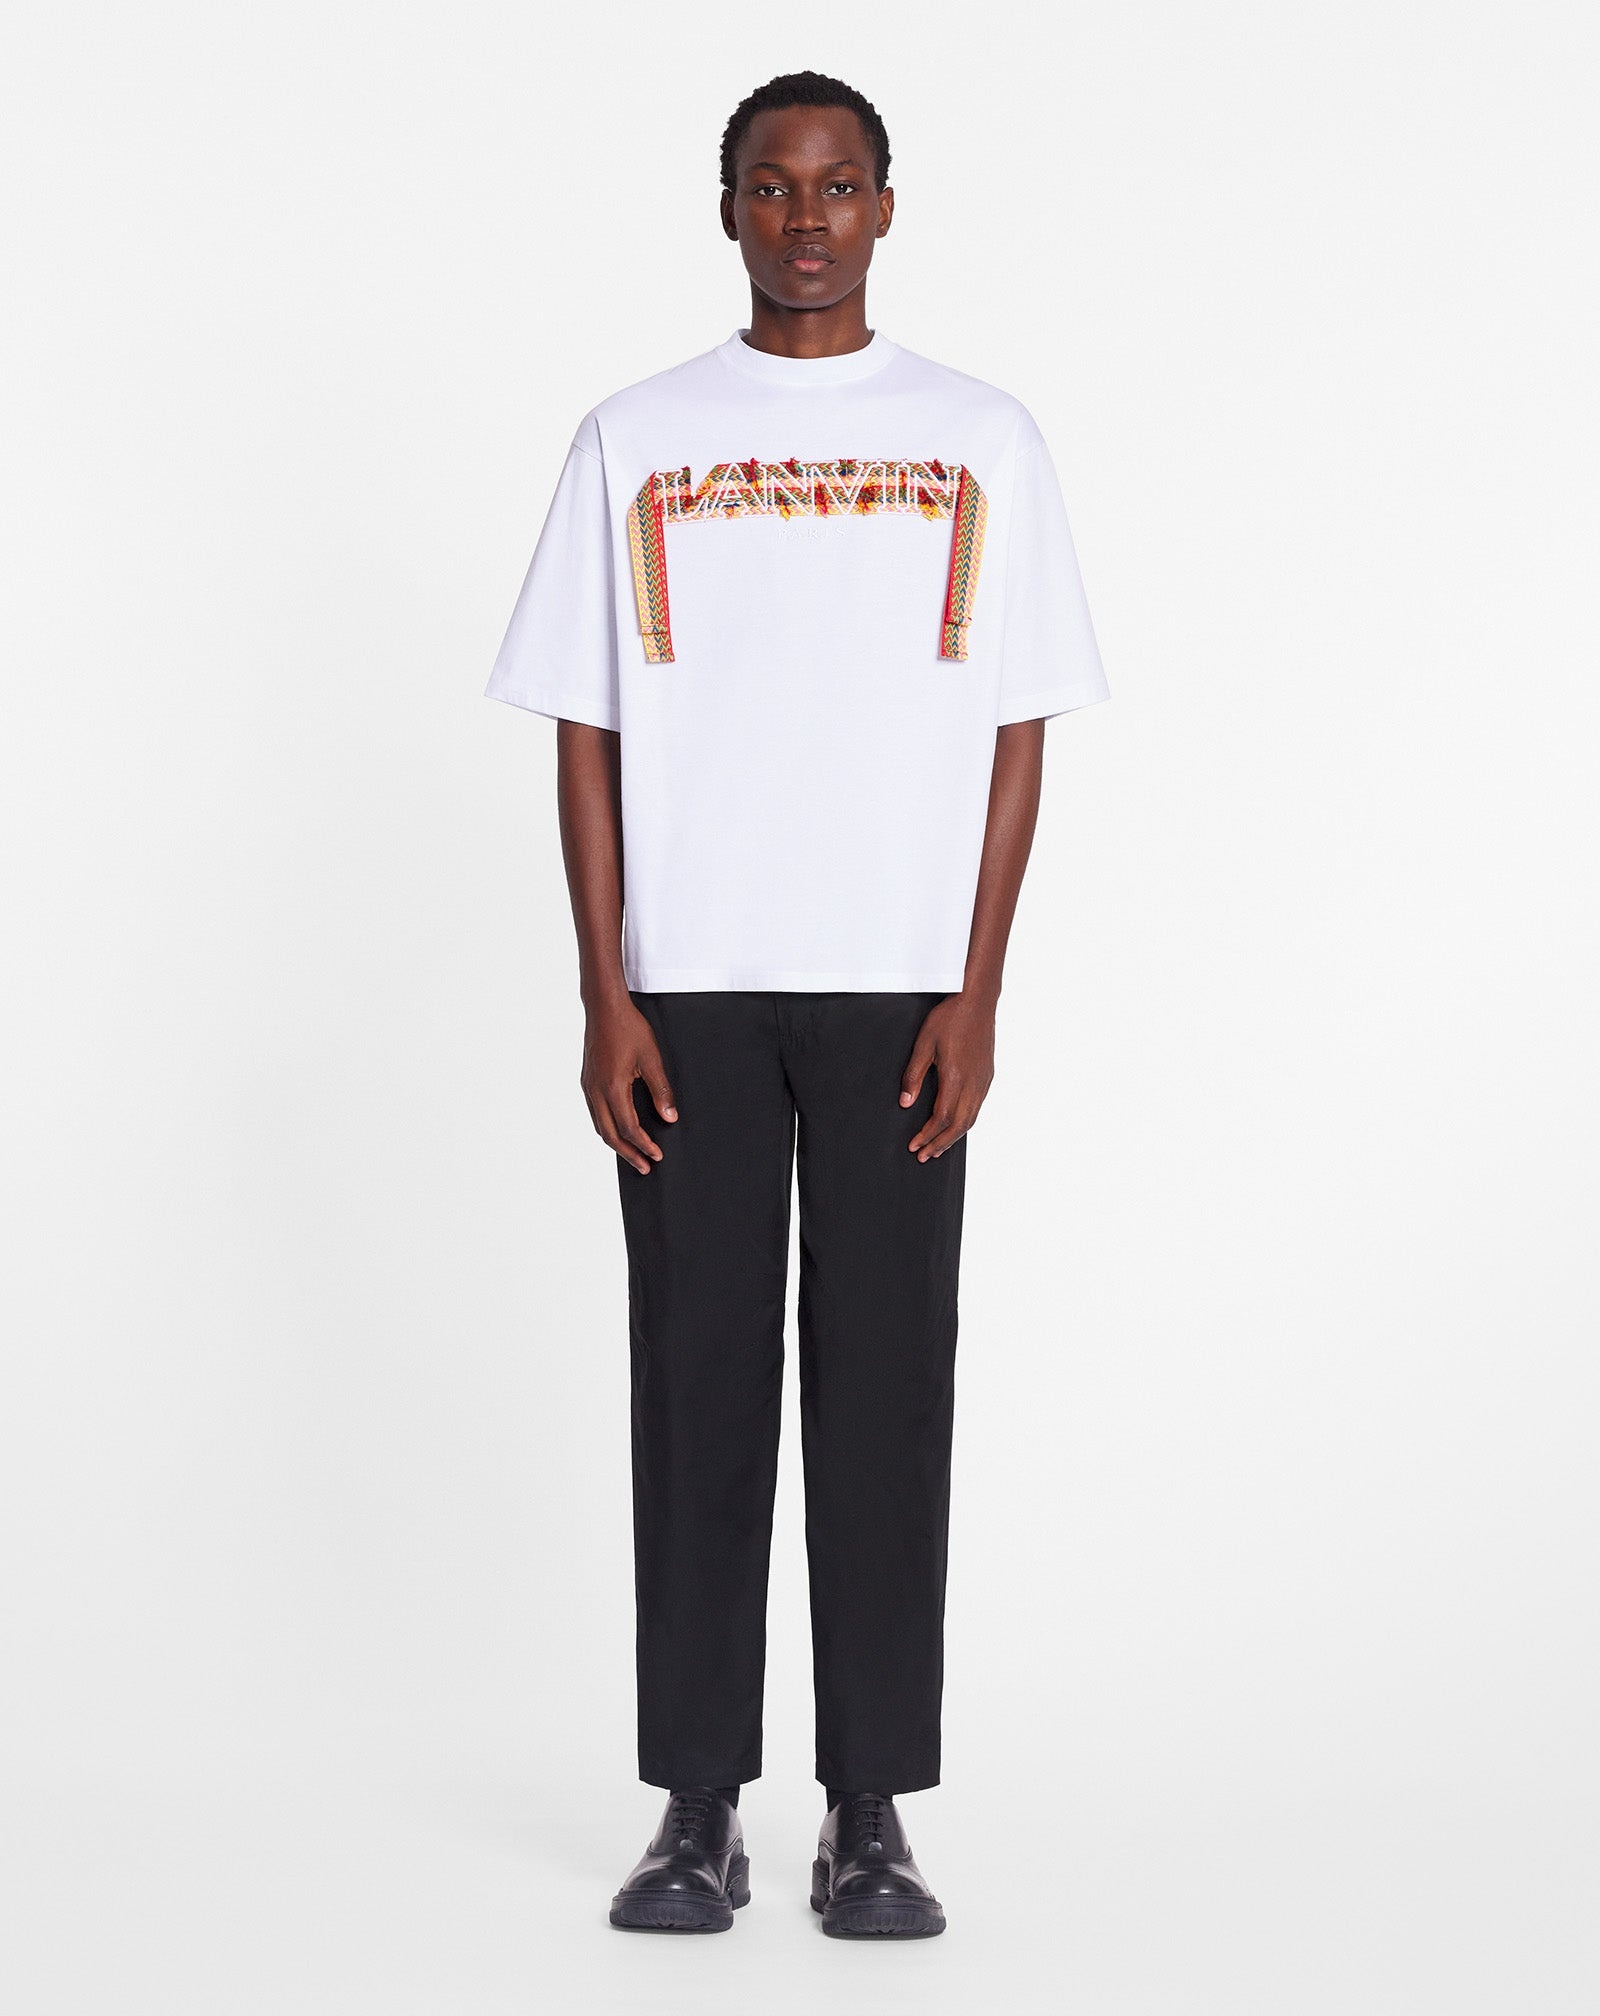 CURB LANVIN EMBROIDERED OVERSIZED T-SHIRT - 2